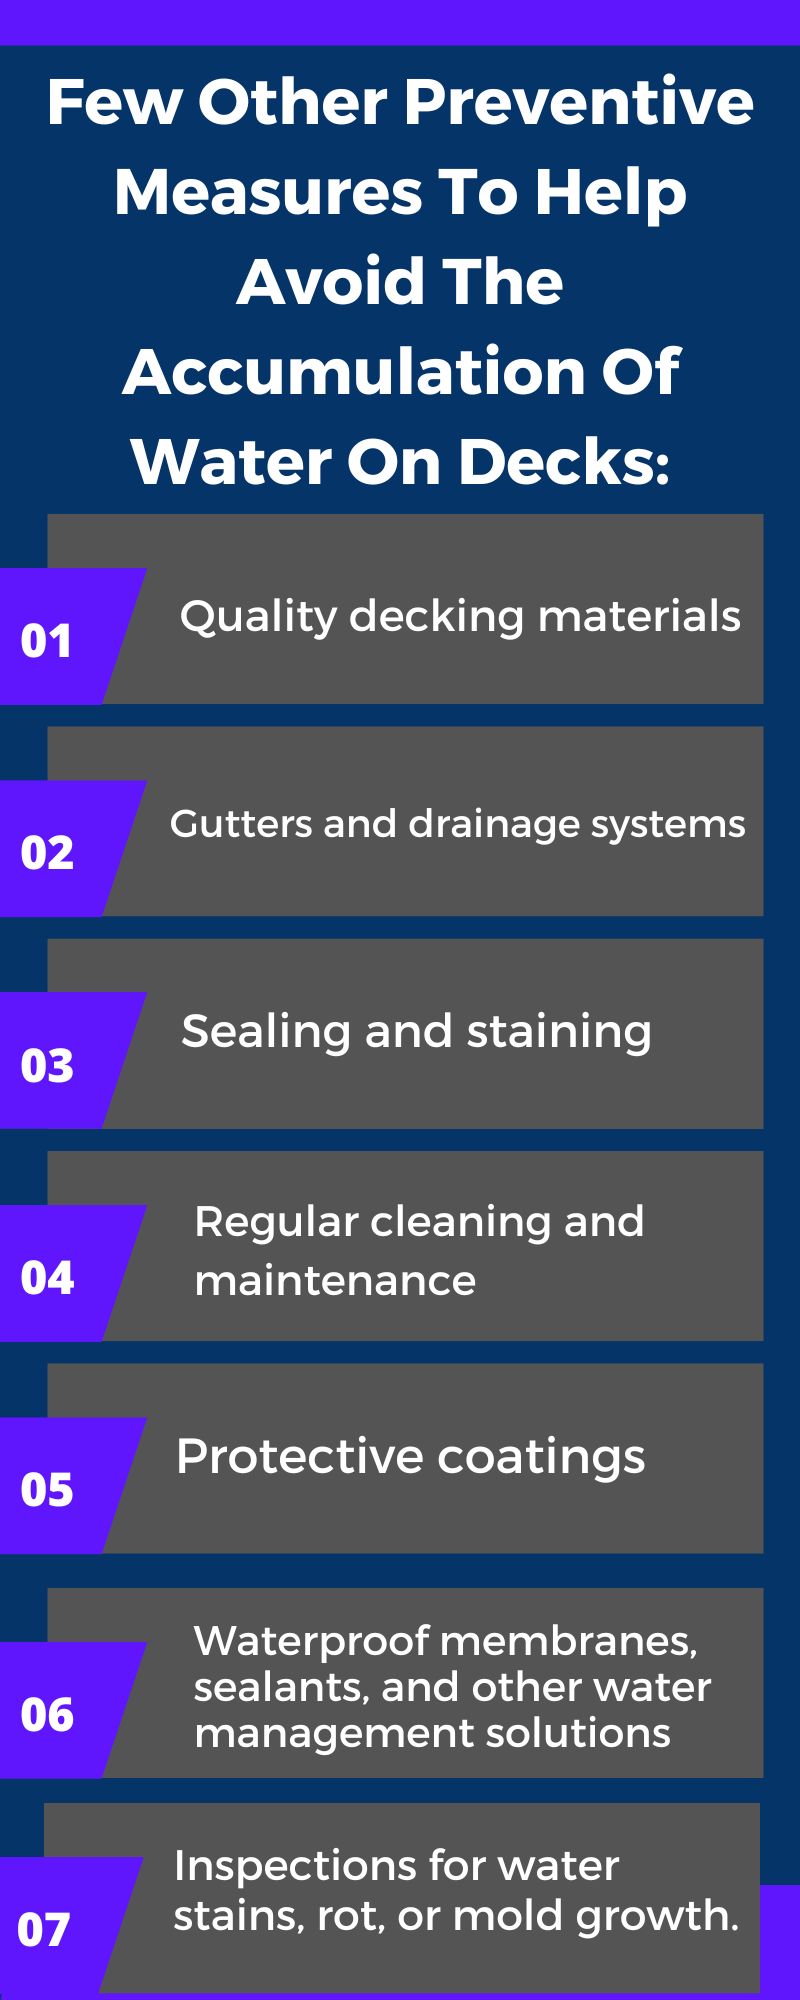 Few other preventive measures to help avoid the accumulation of water on decks